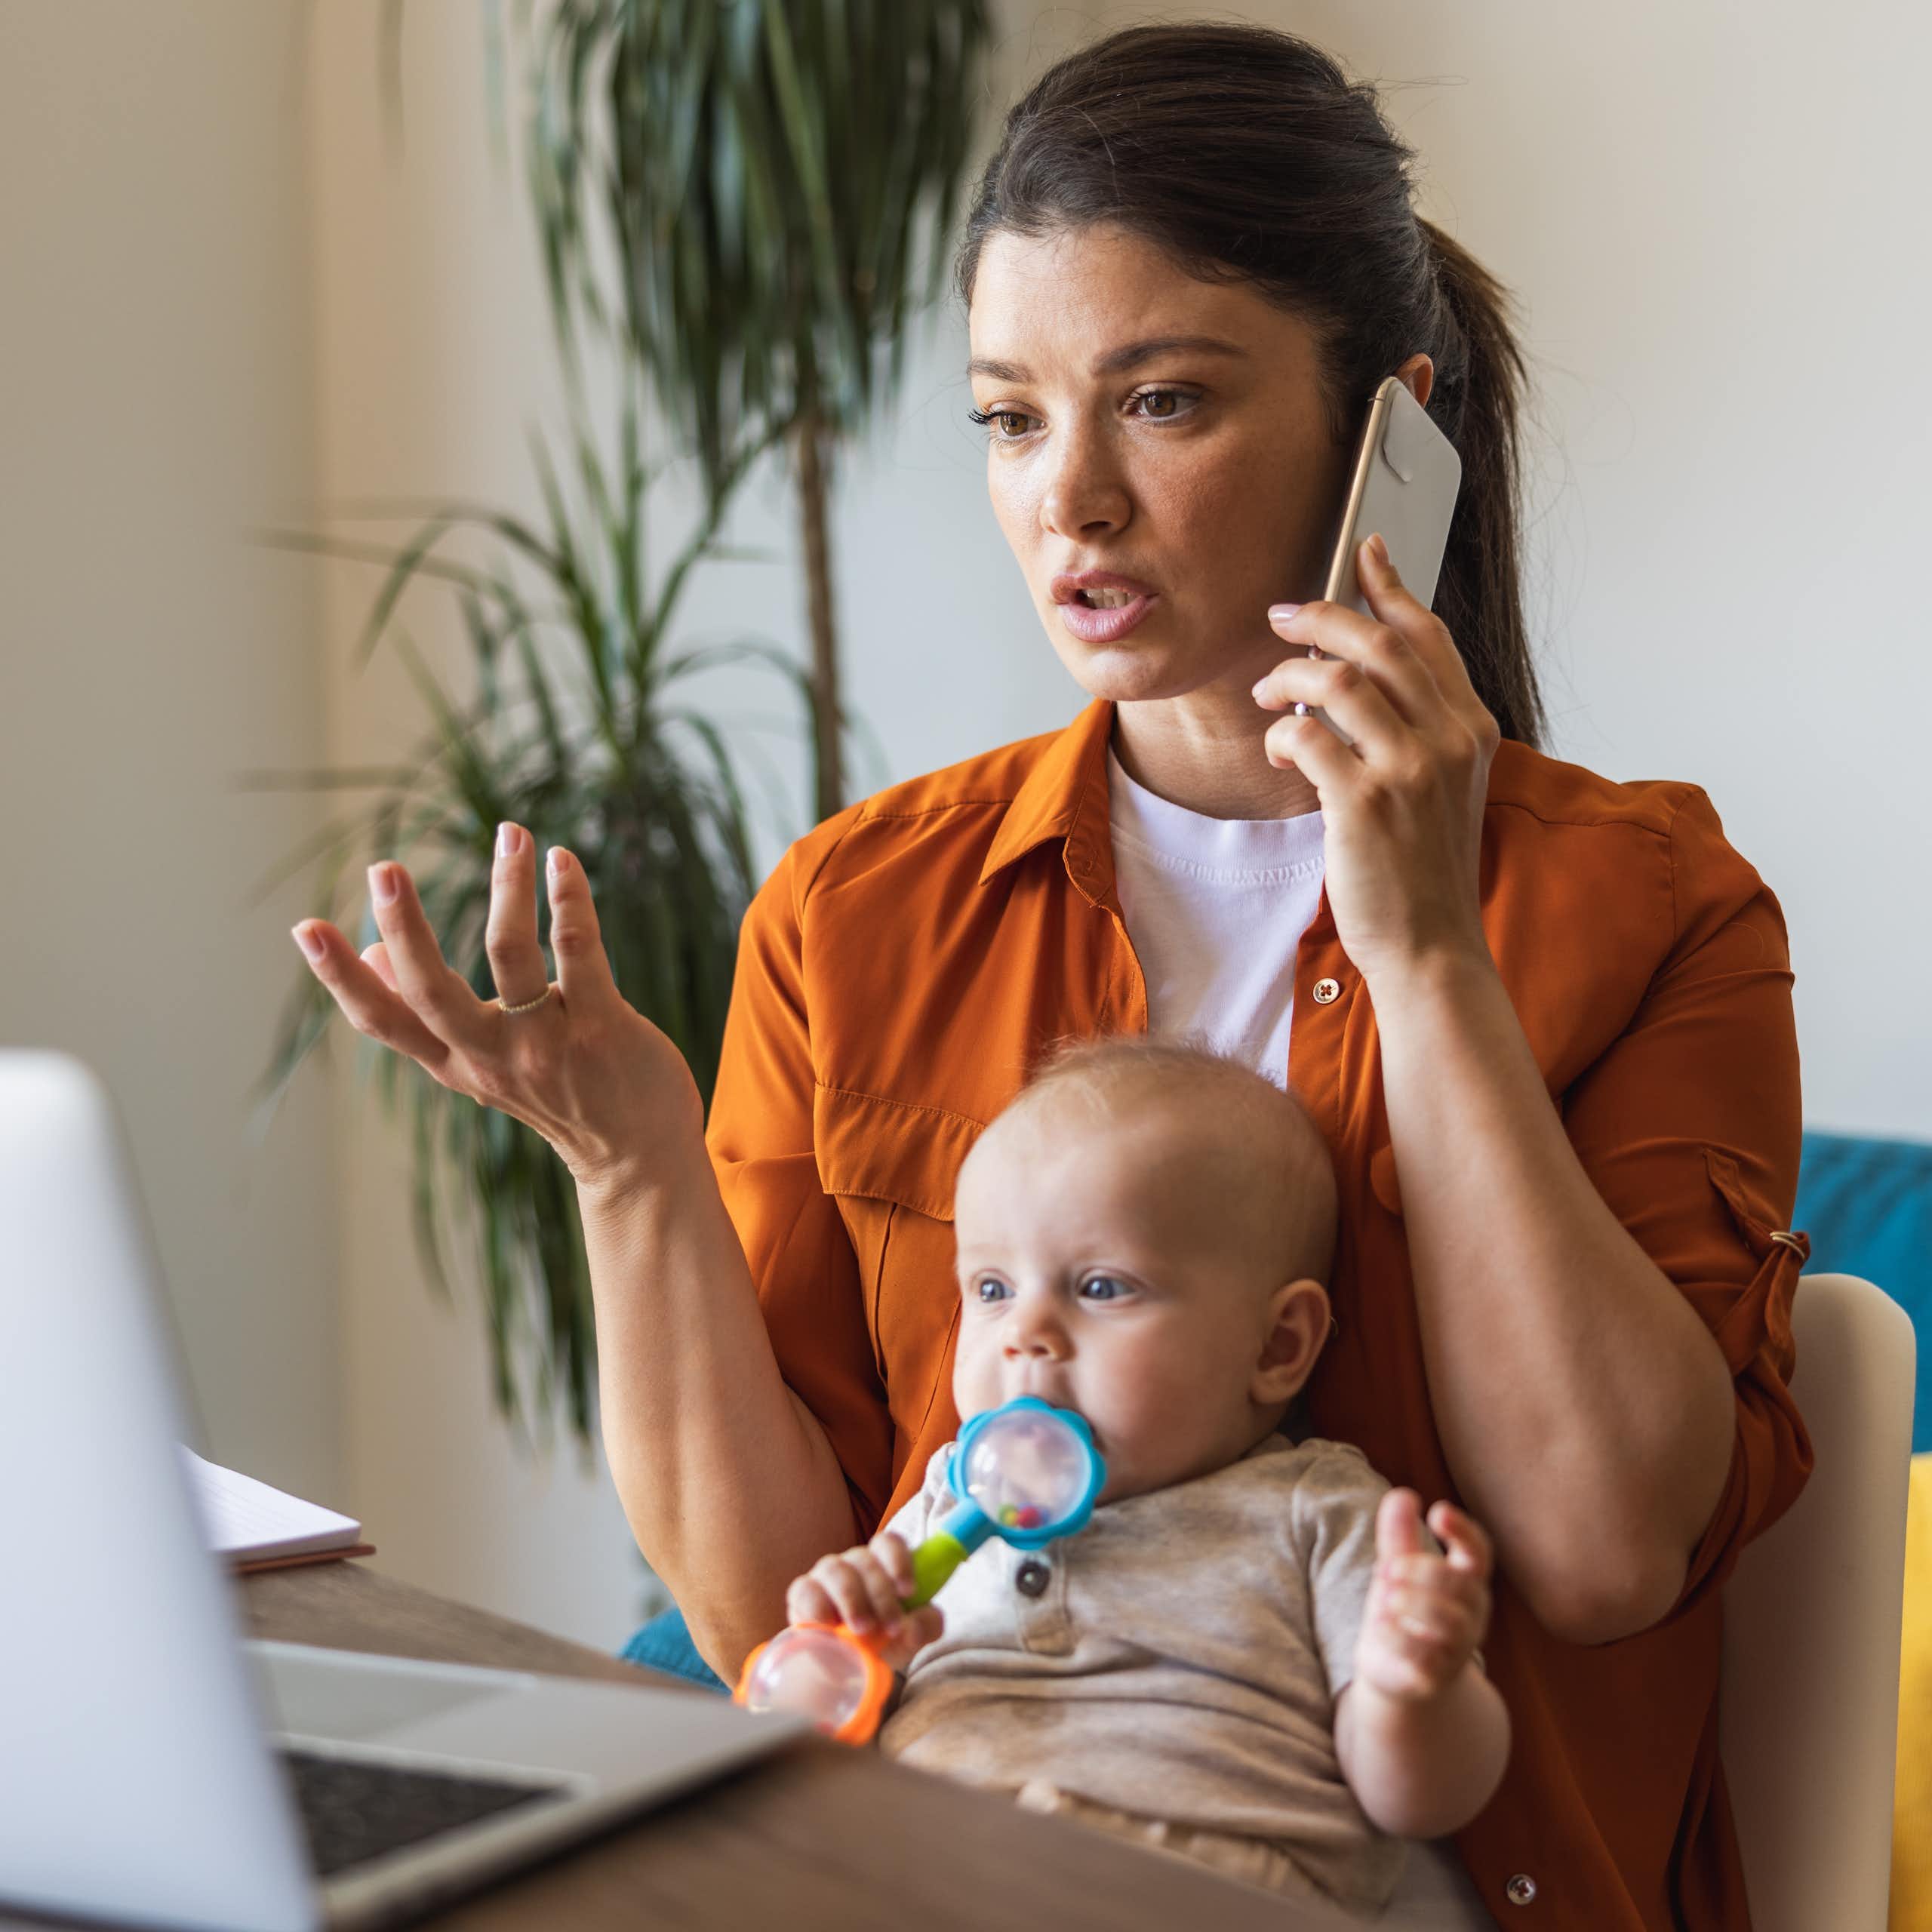 A young woman talks on a cell phone while looking at an open laptop. A baby sits on her lap chewing on a toy.